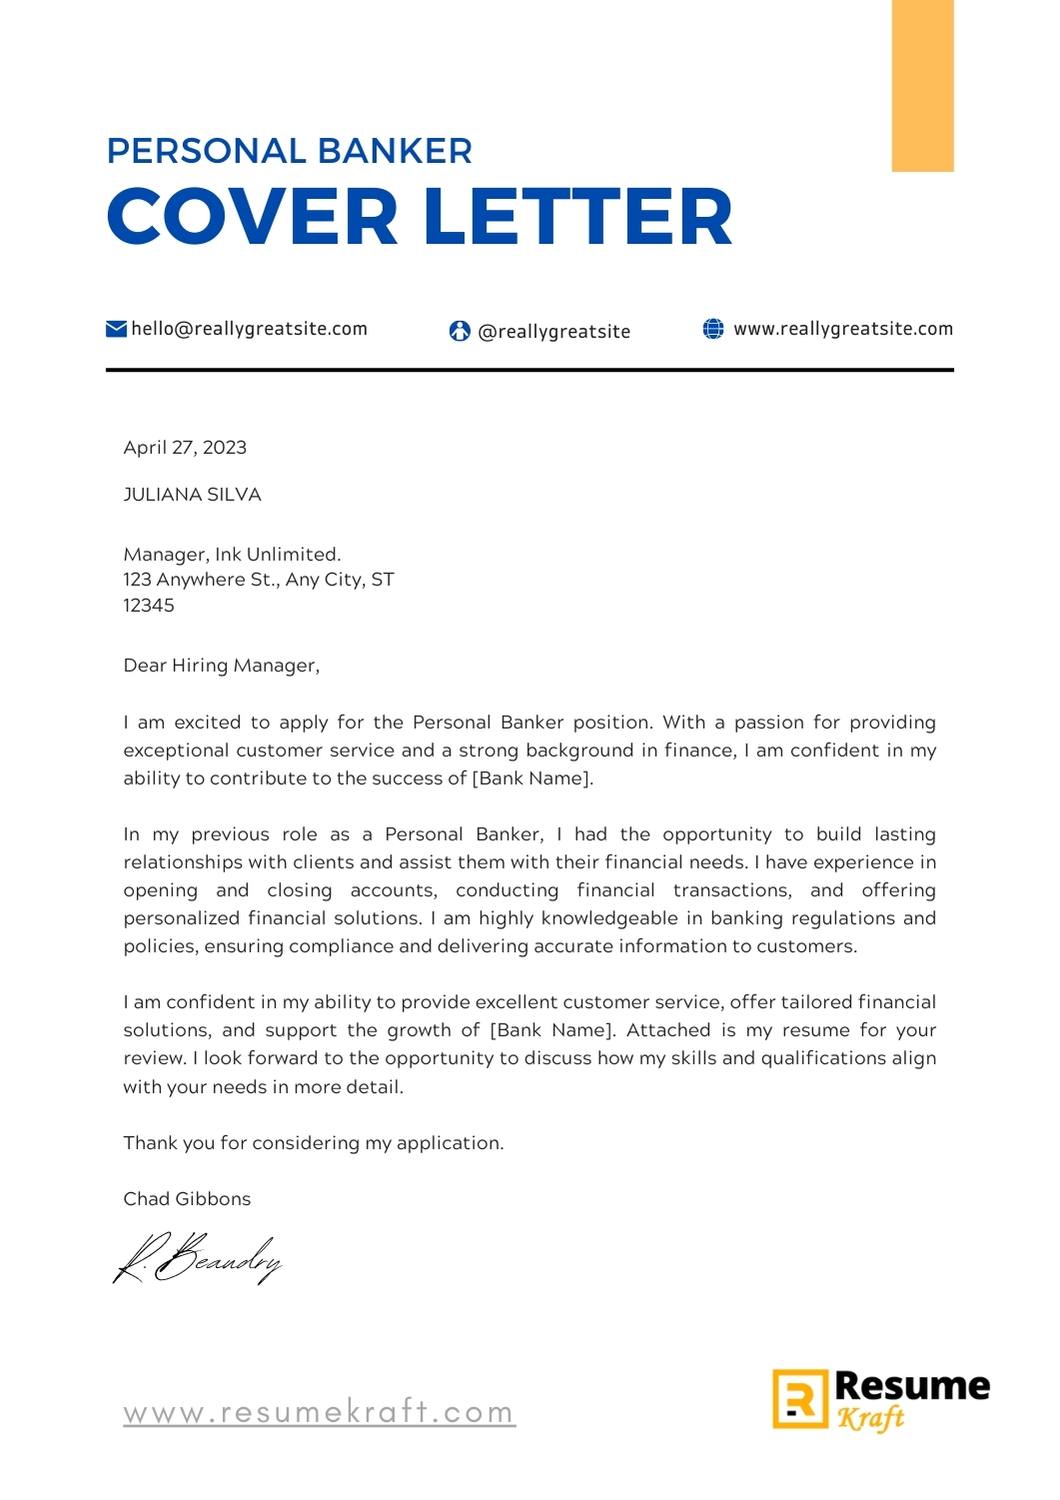 cover letter for personal banker entry level